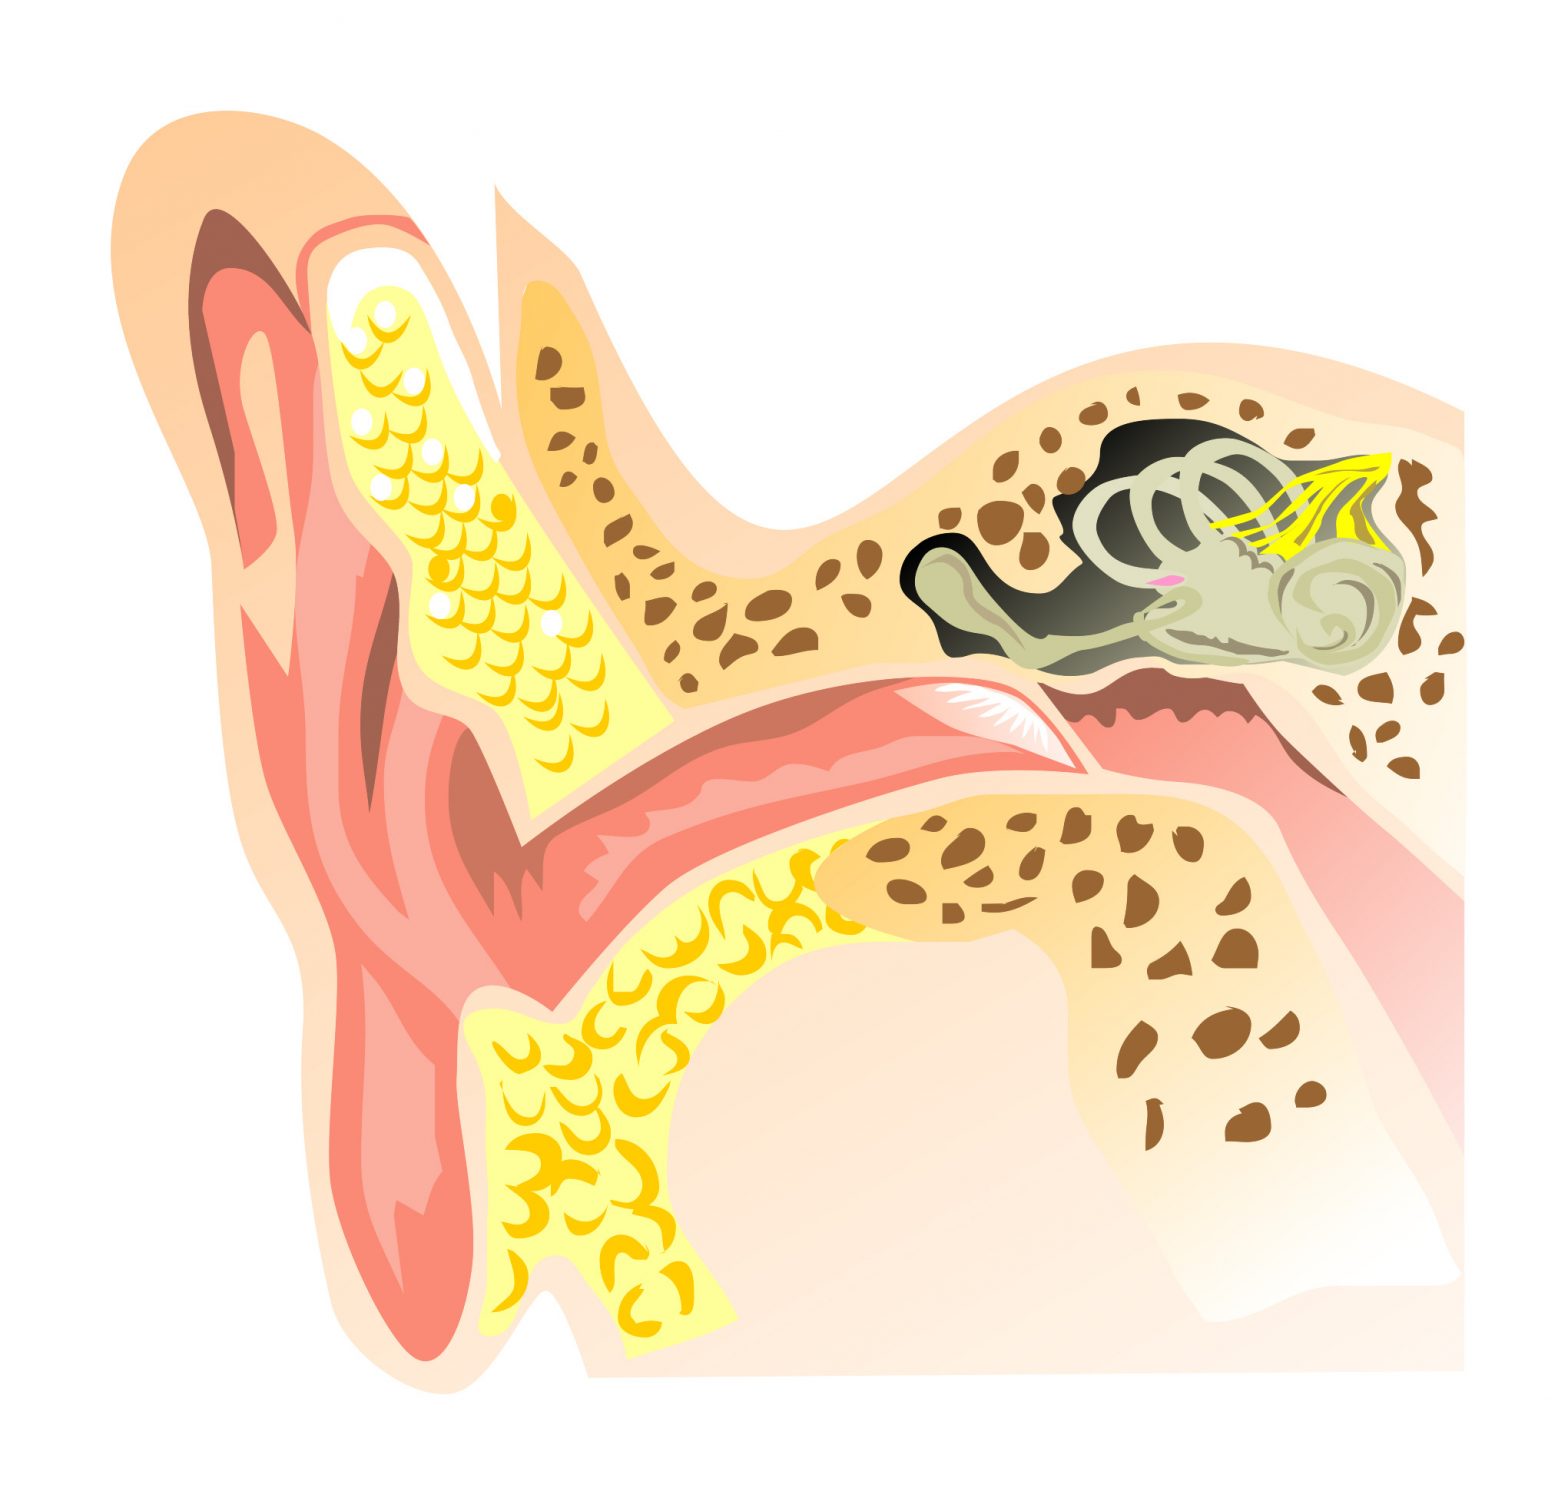 Hearing Health Check – What is Tinnitus and How is it Treated?